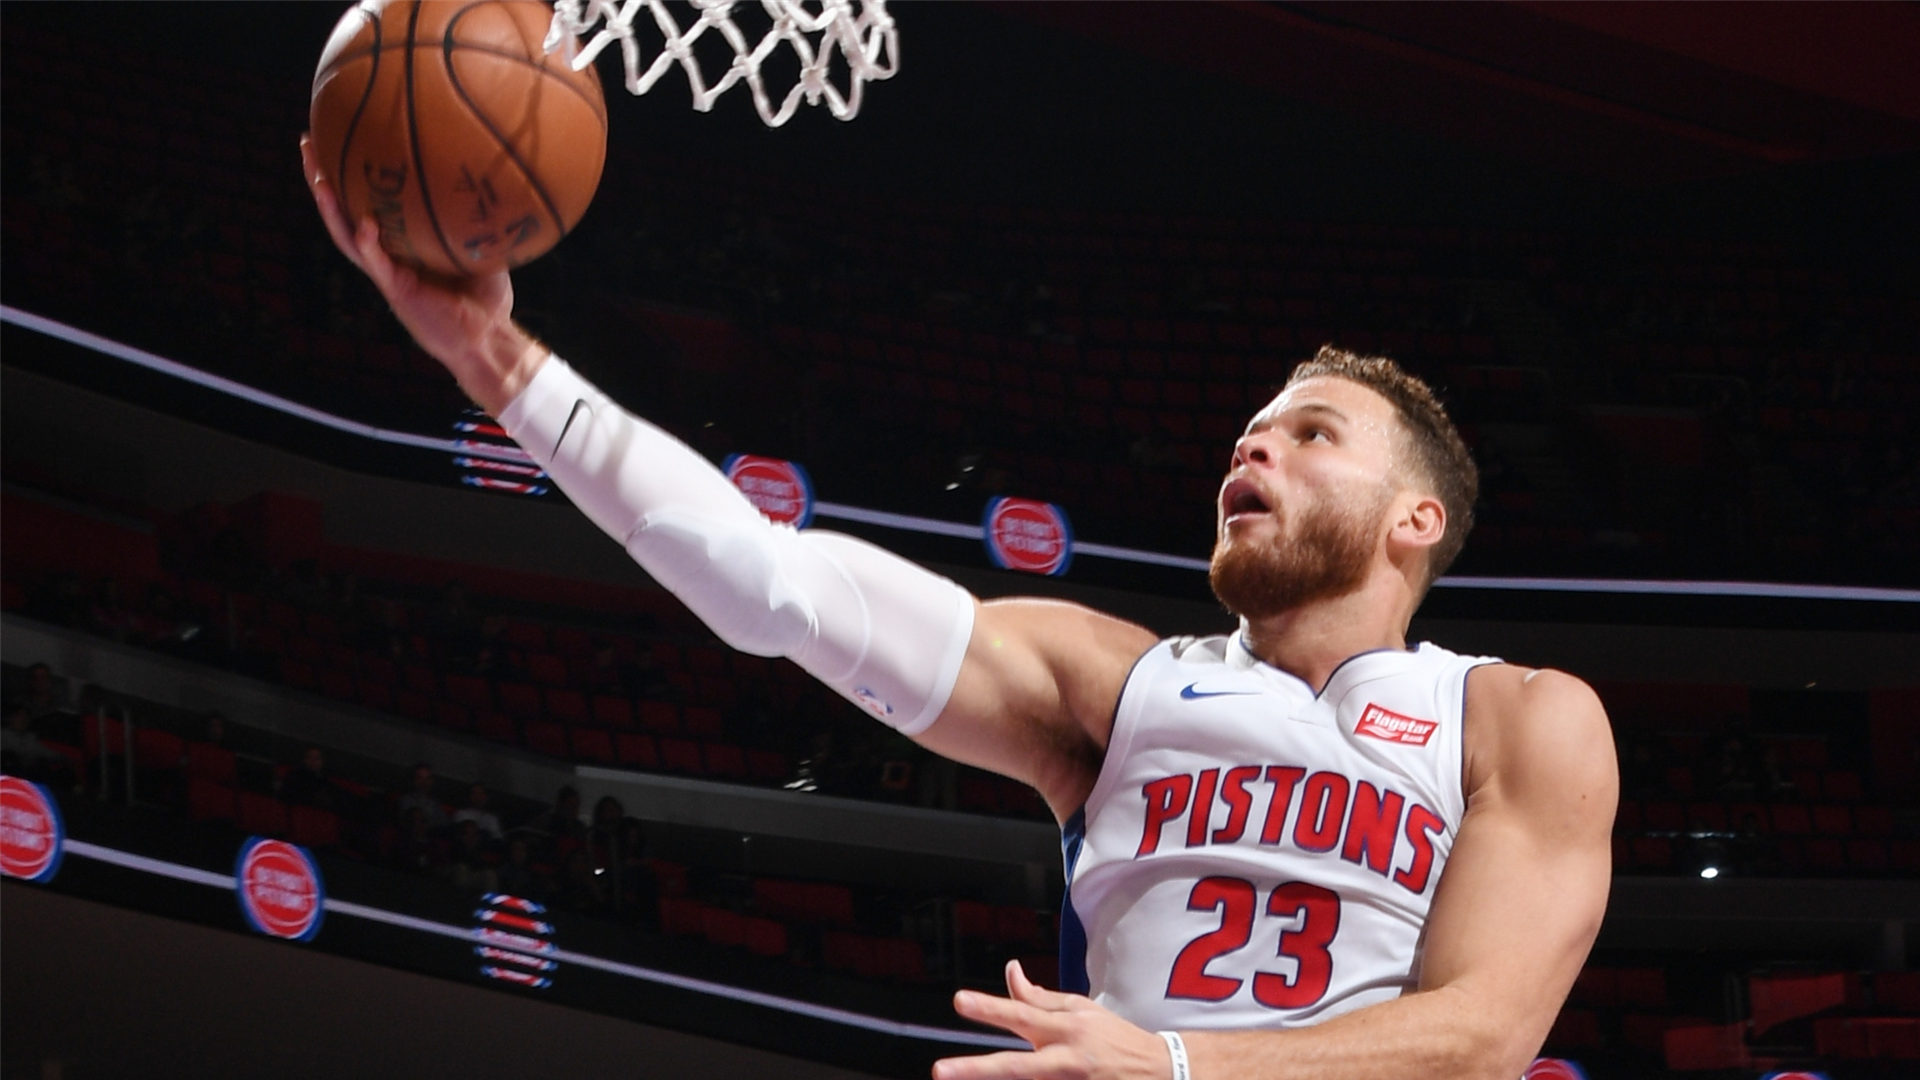 Blake Griffin Is Off To The Best Start Of His Career - Blake Griffin Wallpaper 2019 - HD Wallpaper 